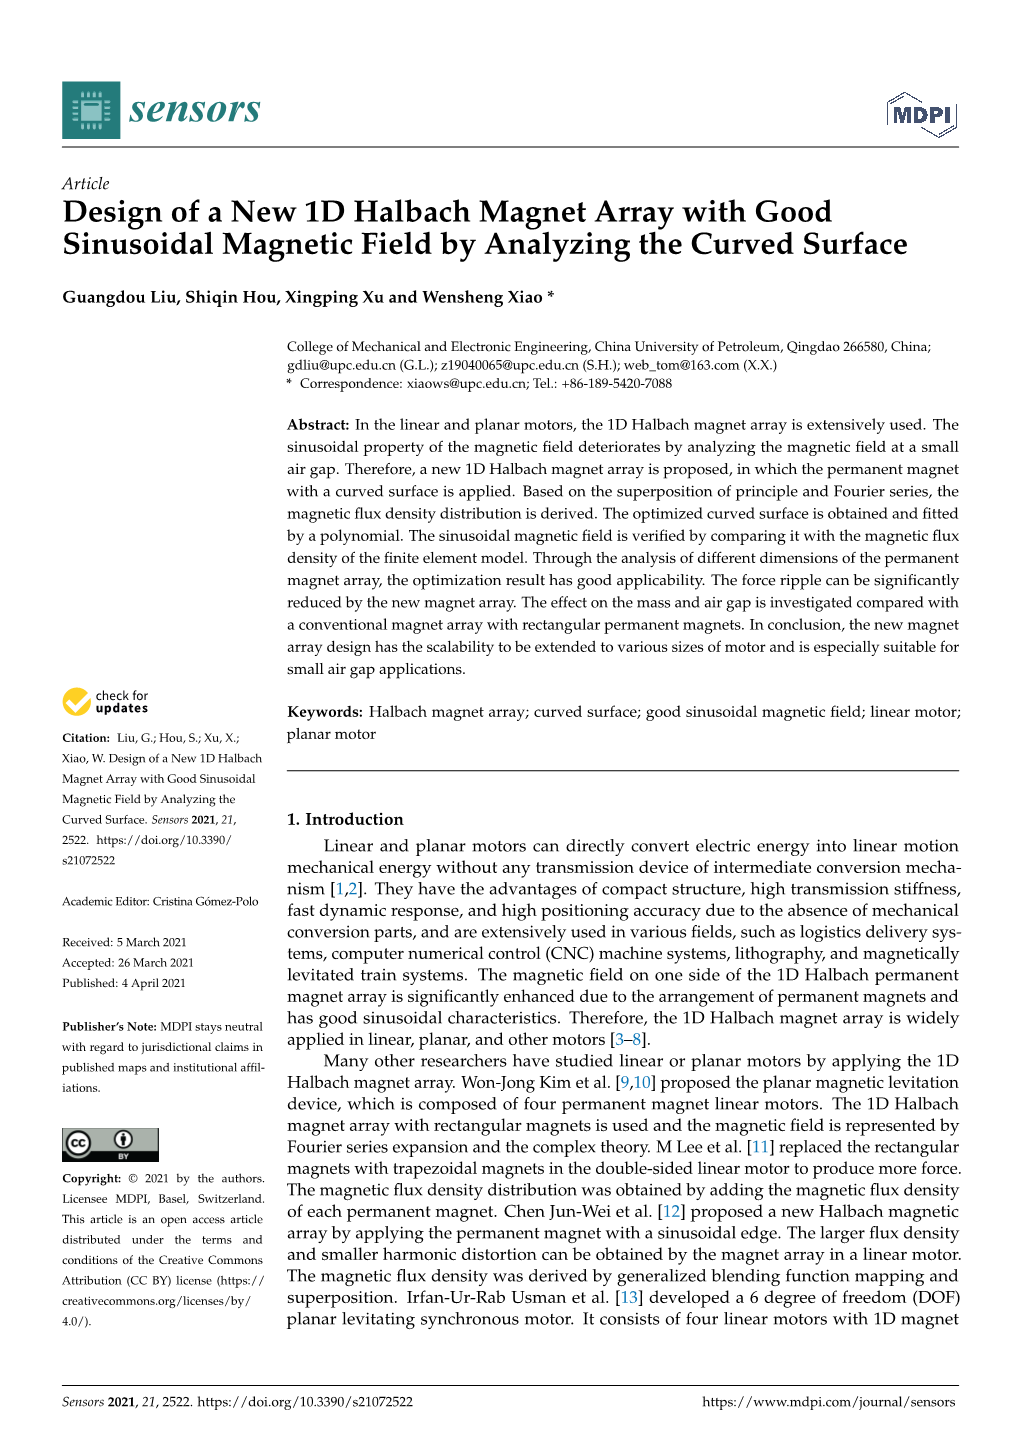 Design of a New 1D Halbach Magnet Array with Good Sinusoidal Magnetic Field by Analyzing the Curved Surface